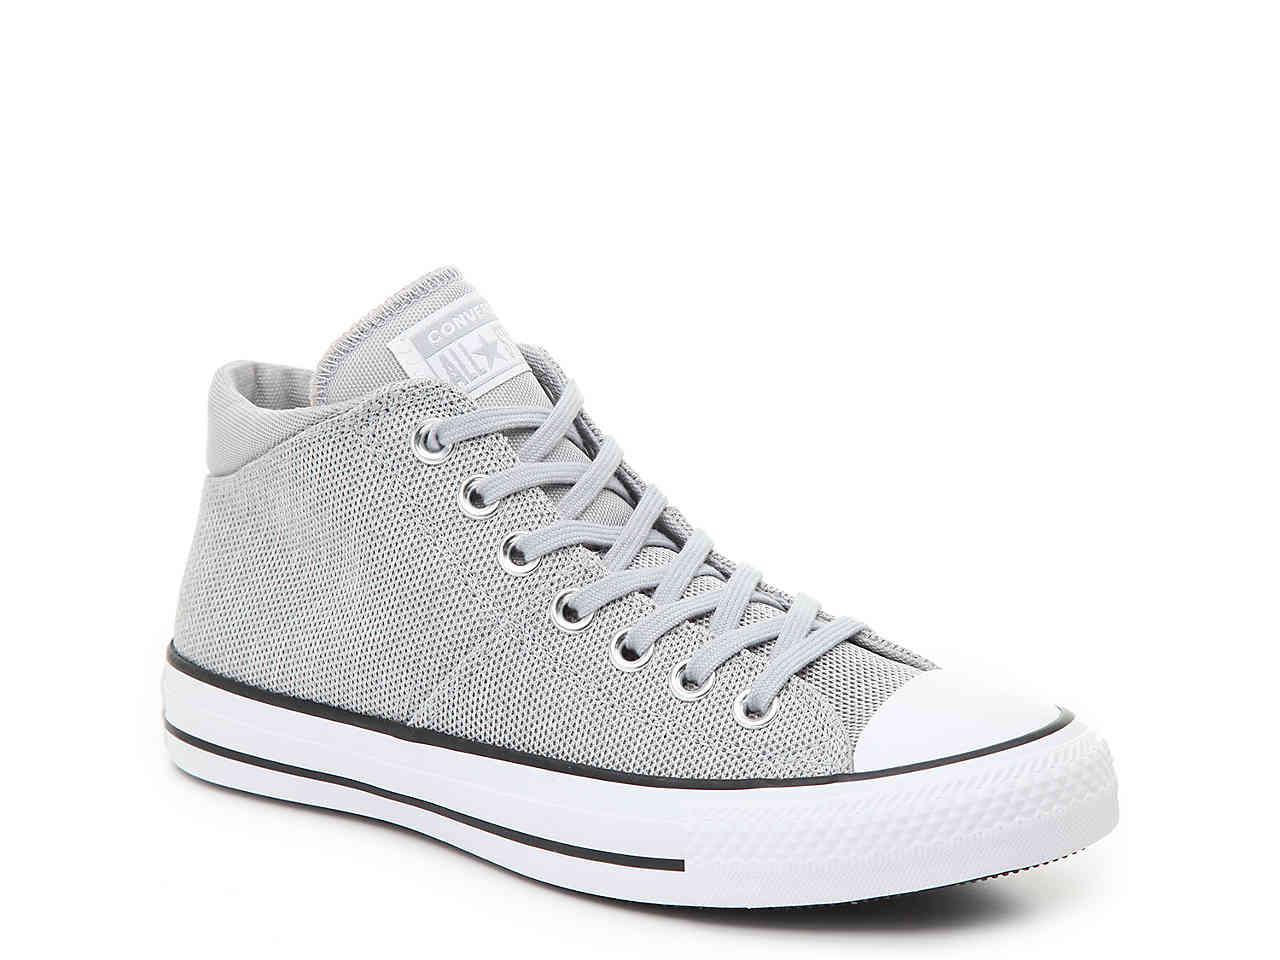 Converse Chuck Taylor All Star Madison High Top Sneakers in Grey (Gray ...